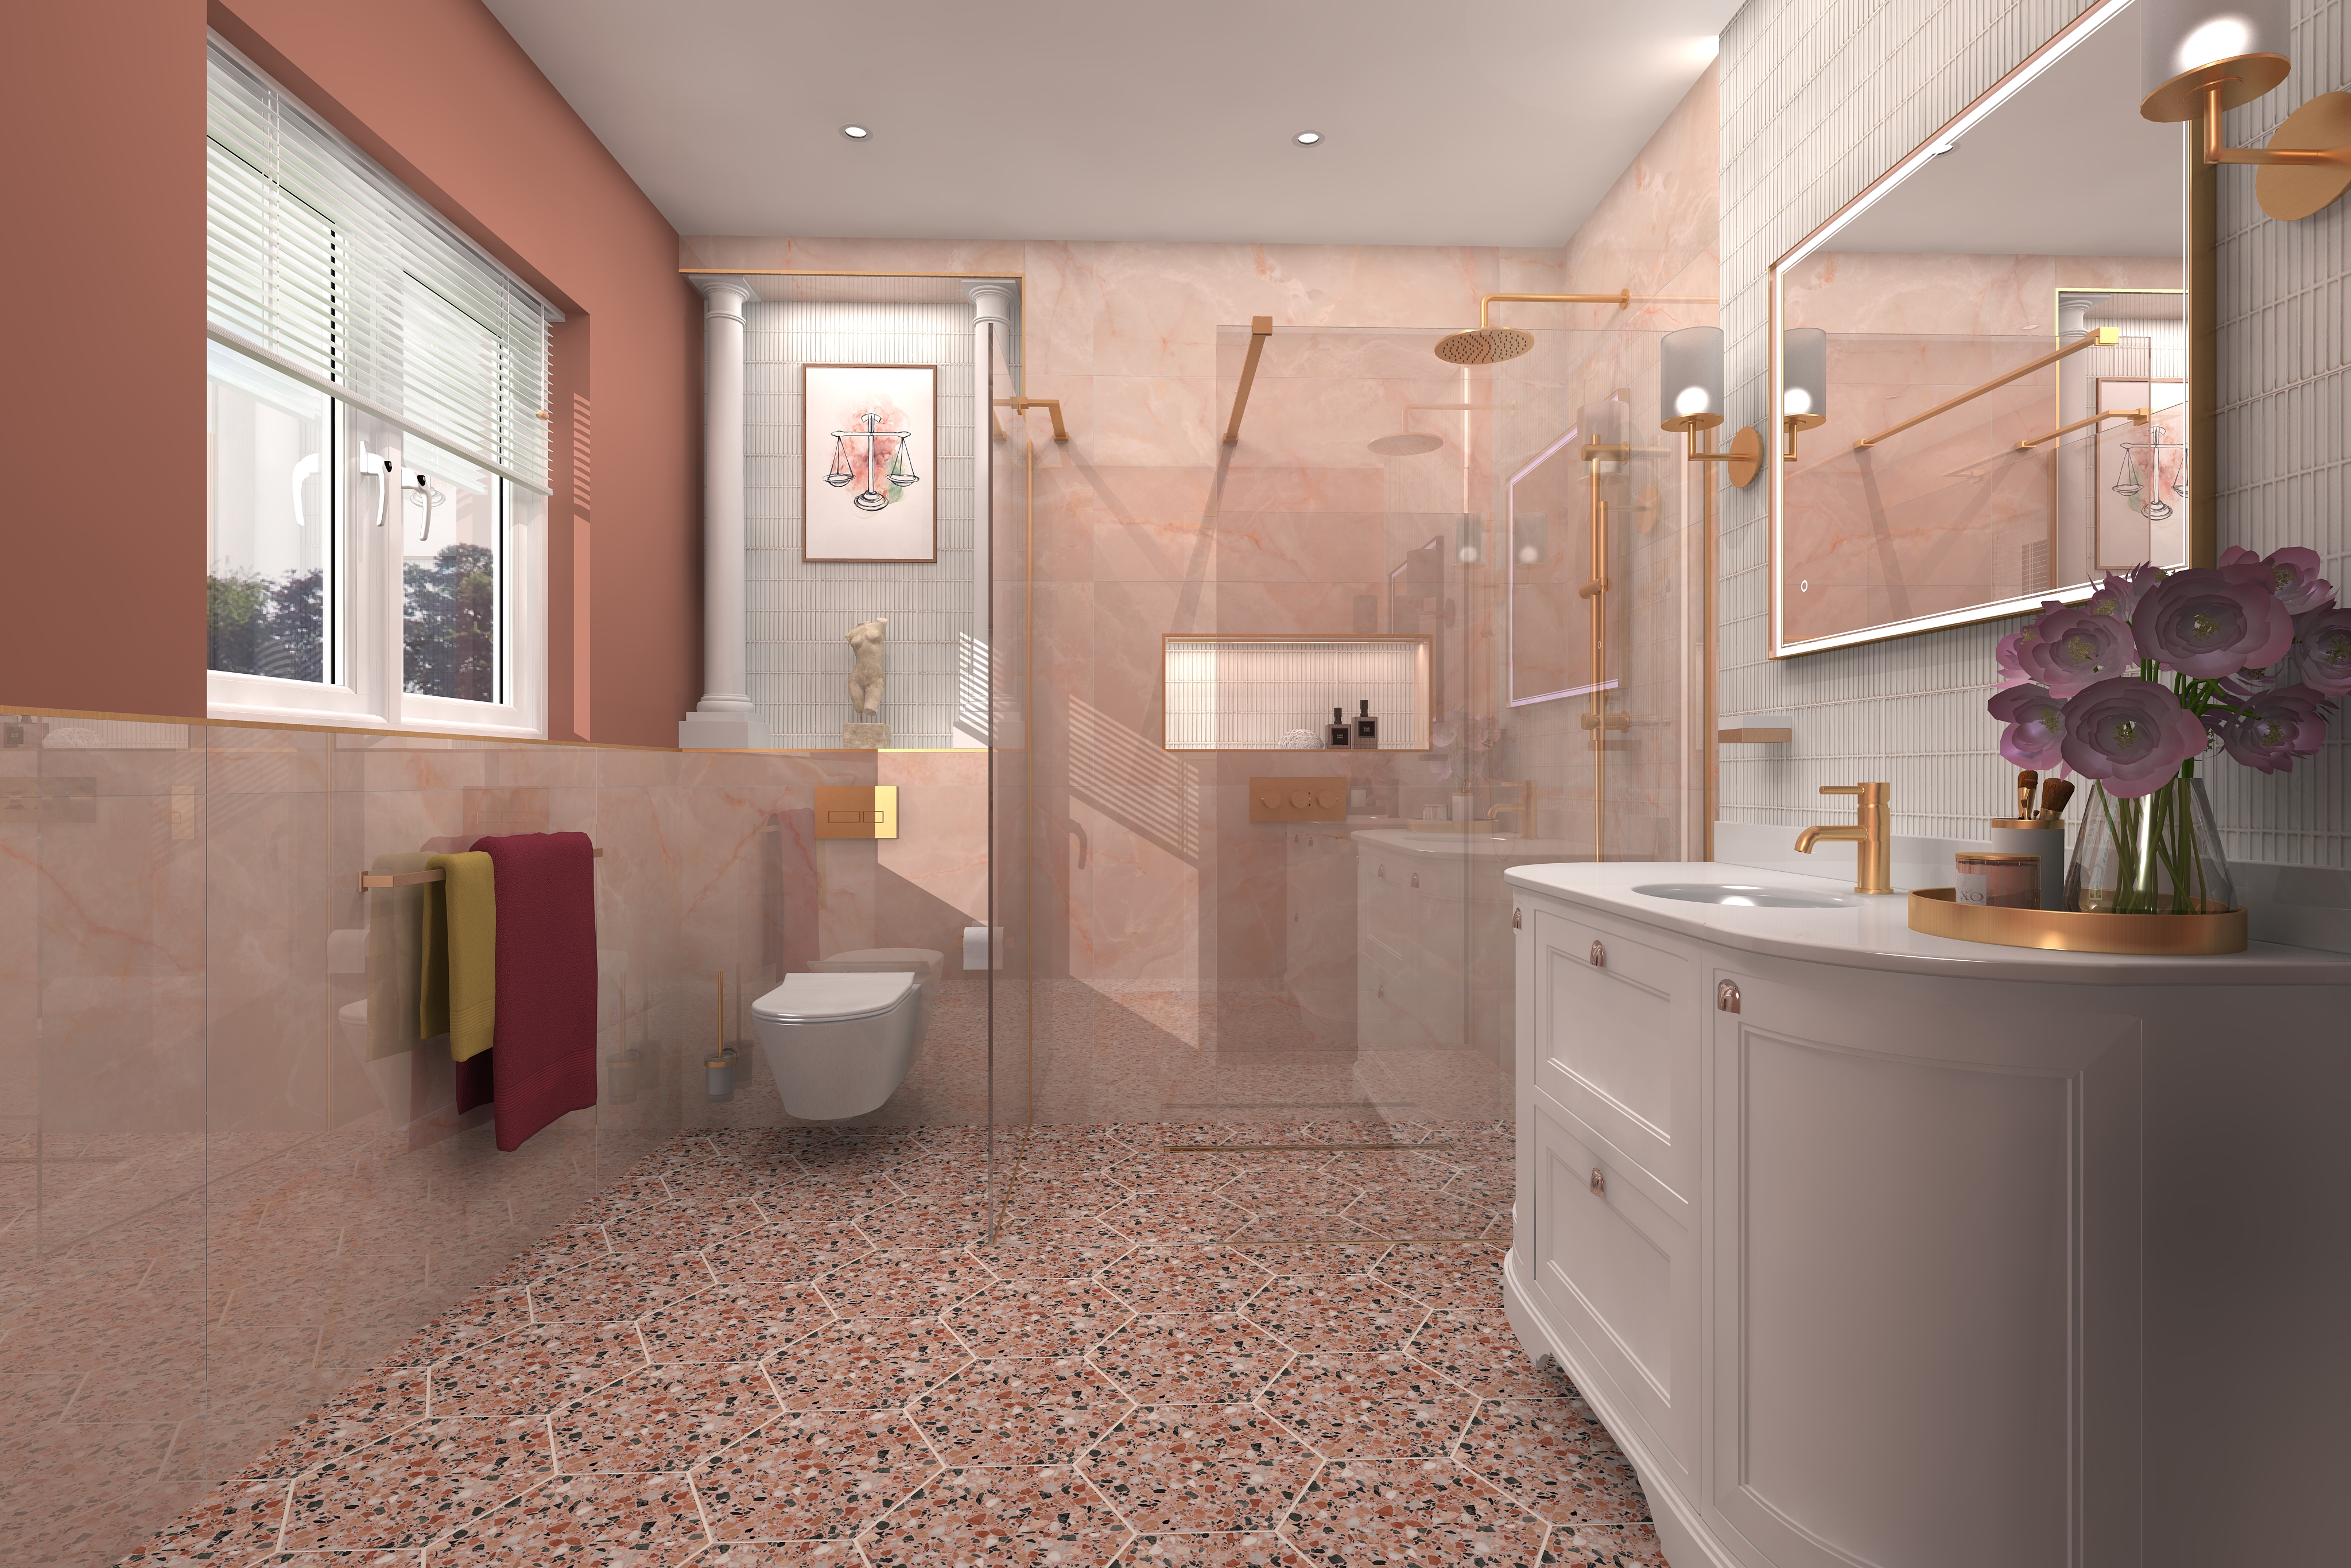 Digital lifestyle image of the Libra inspired bathroom, with terrazzo hexagonal tiles, marble wall tiles with a pink hue, white curved washbasin vanity unit, brushed gold basin tap, brushed gold framed LED mirror, glass shower enclosure with brushed gold riser rail, handset shower and wall mounted round shower head, wall mounted toilet and wall mounted towel rail